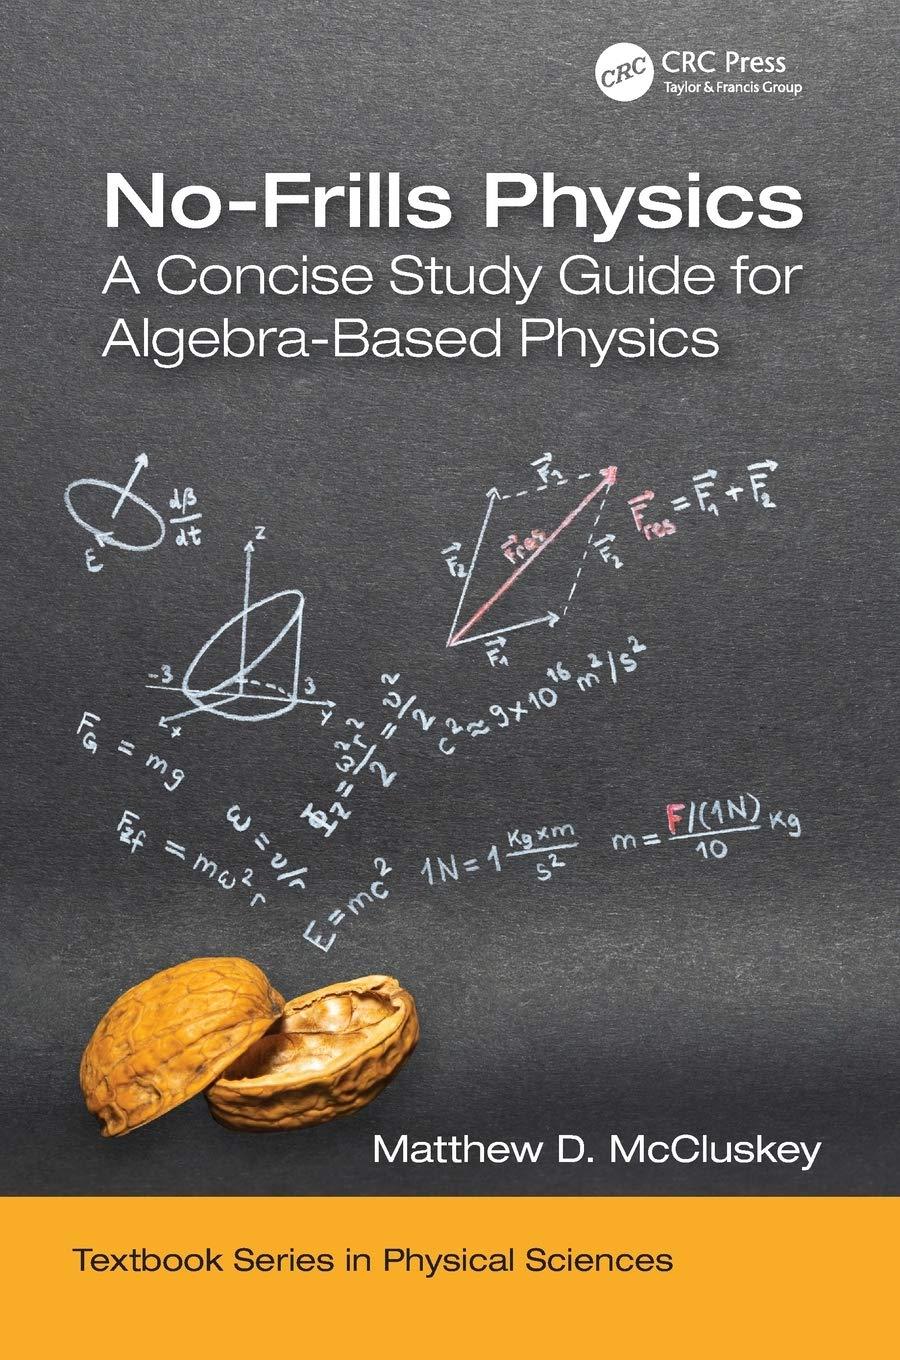 no frills physics a concise study guide for algebra based physics 1st edition matthew d. mccluskey